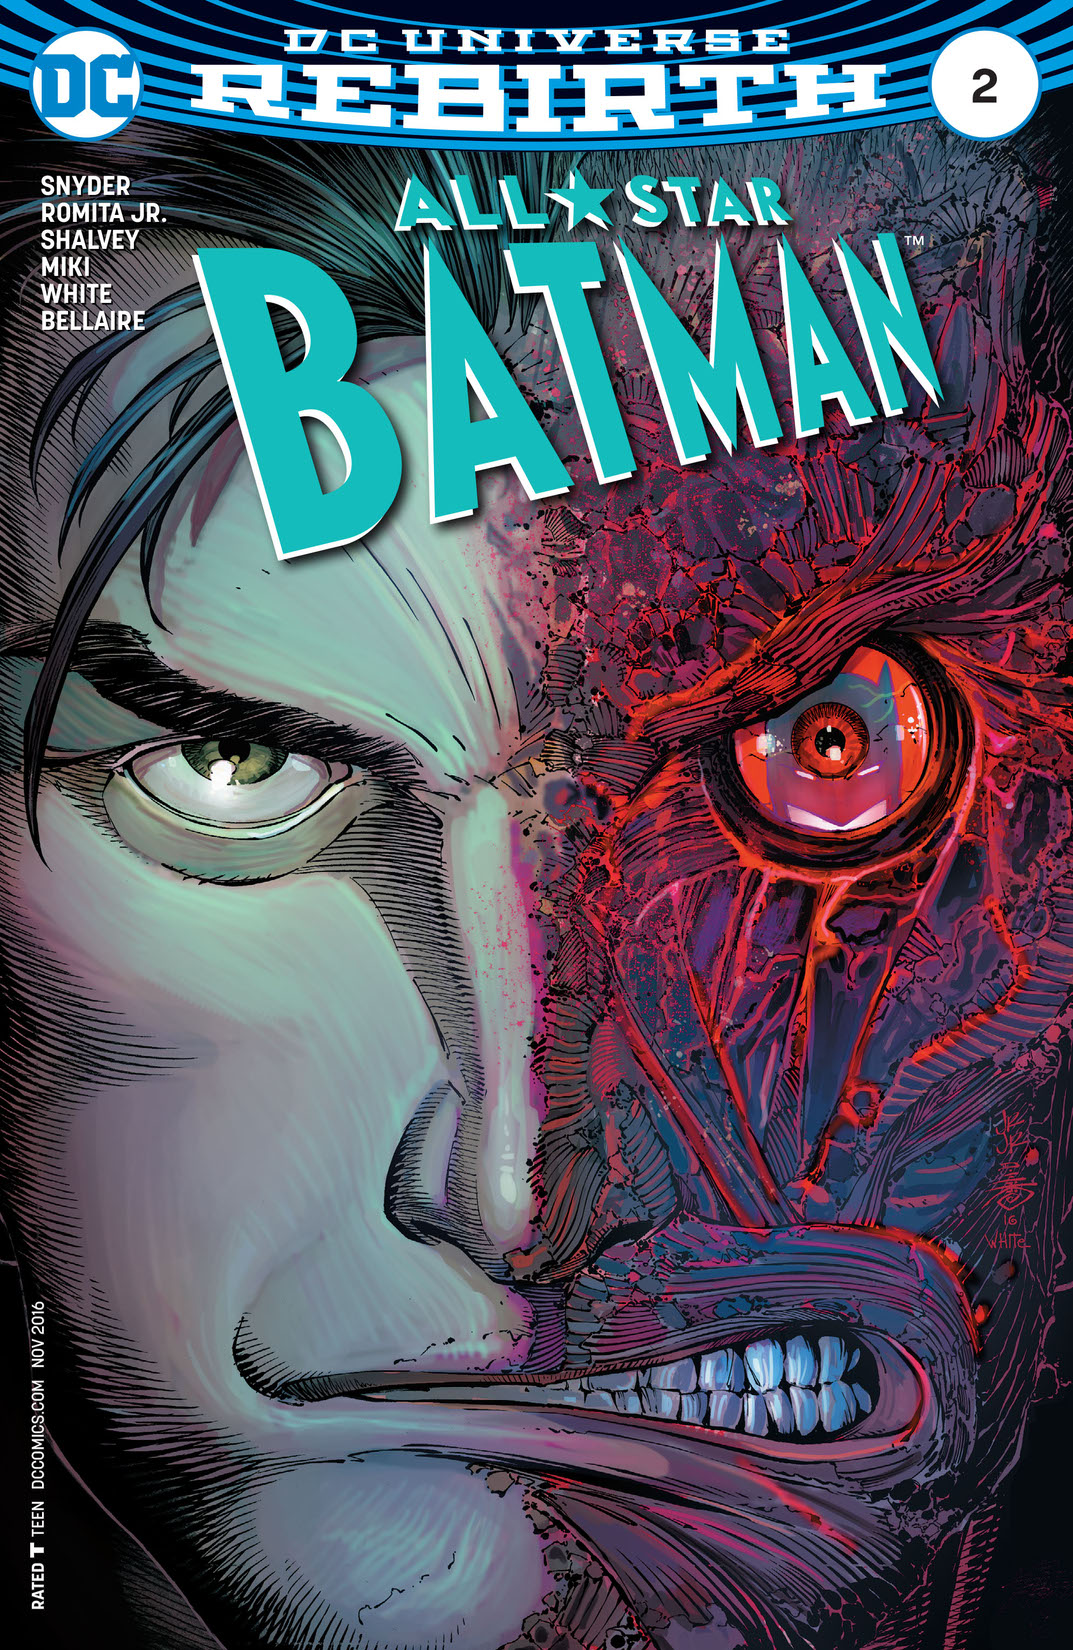 All Star Batman #2 preview images